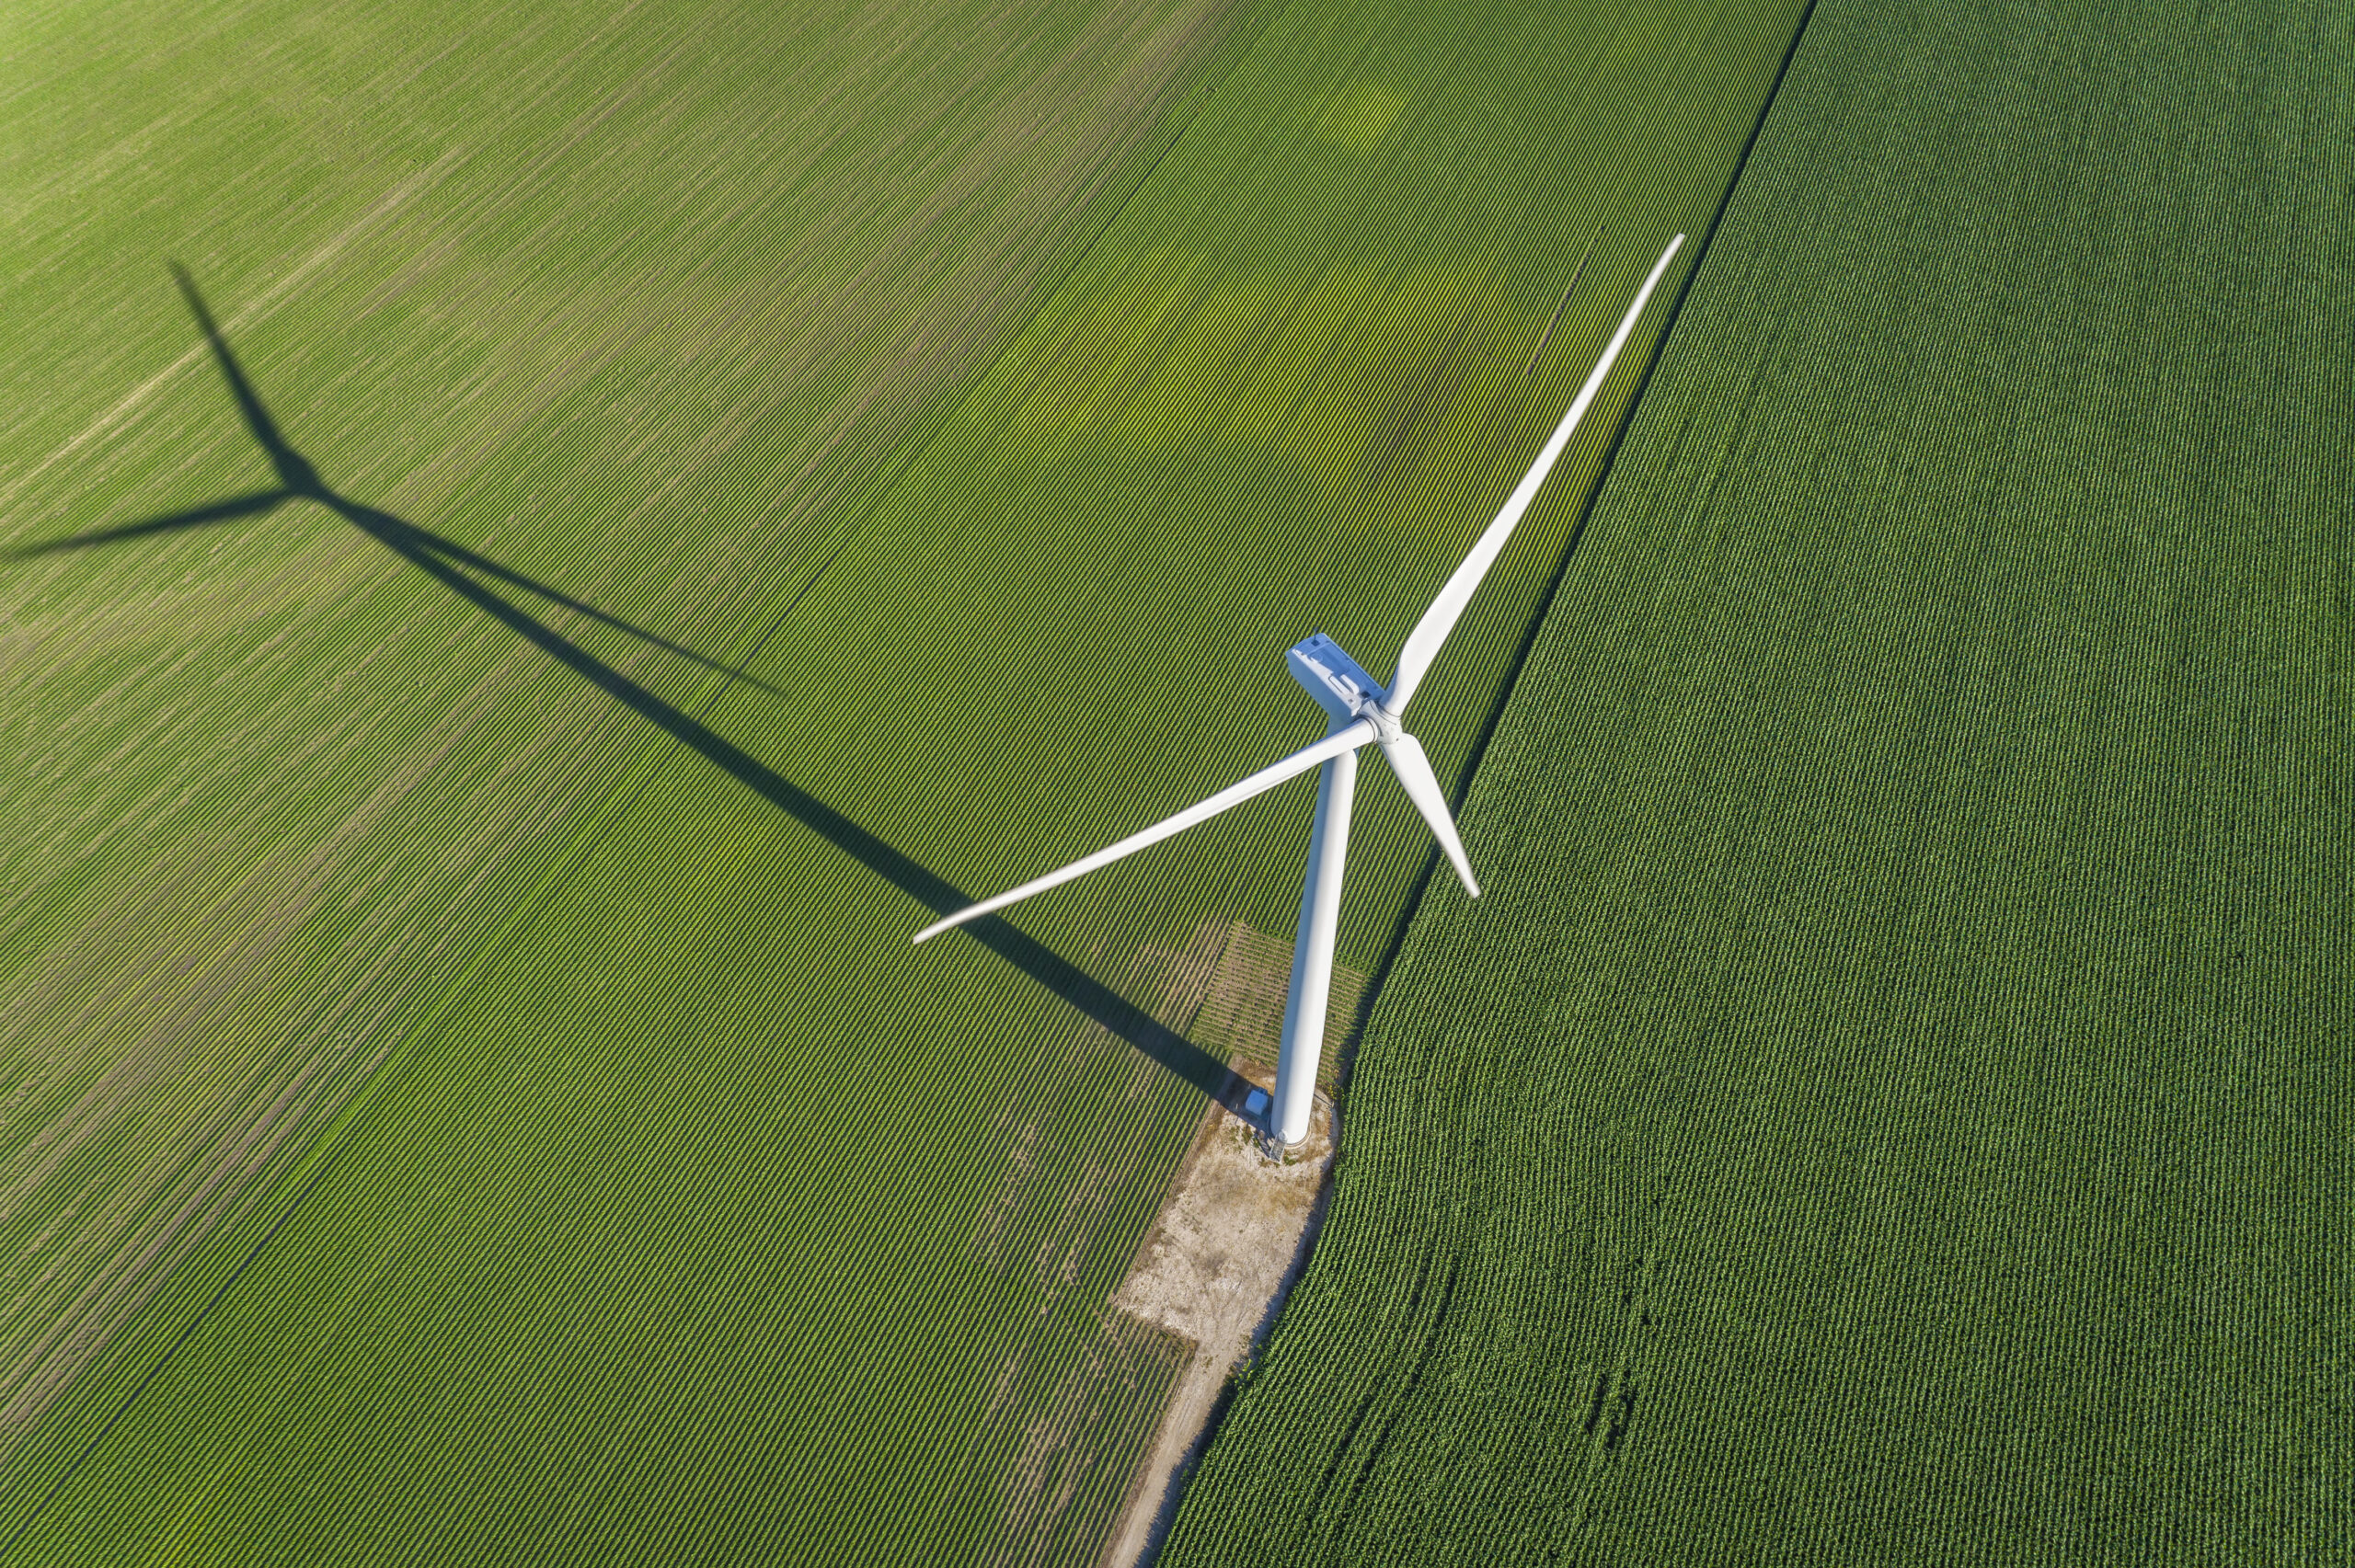 Qualitas Energy starts construction at Salingen wind farm after successful project development scaled